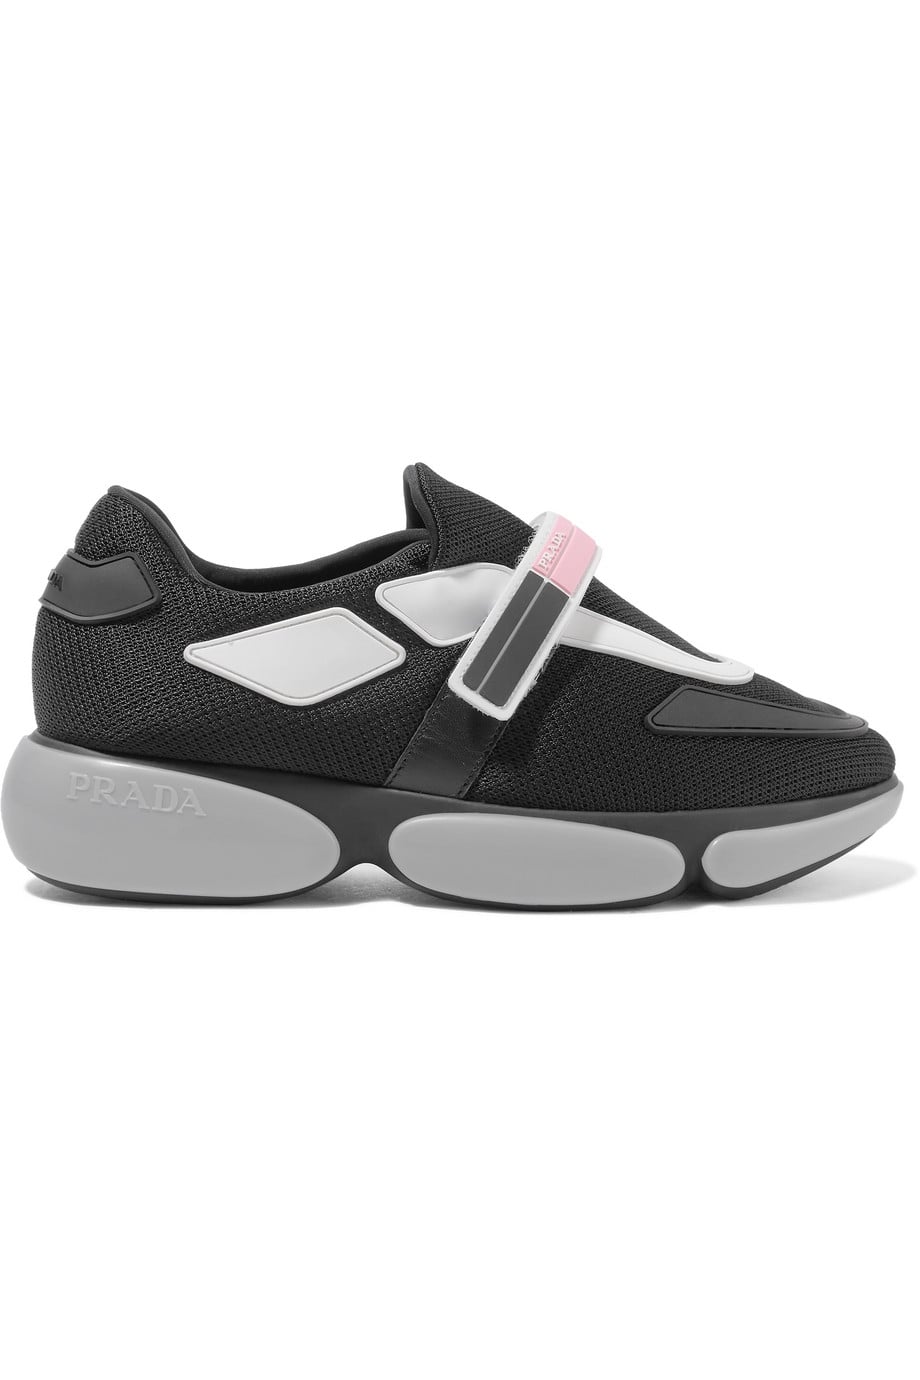 Prada Cloudbust Rubber and Leather-Trimmed Mesh Sneakers | If You're Going  to Try Dad Sneakers, This Is the 1 Outfit to Wear With Them | POPSUGAR  Fashion Photo 13